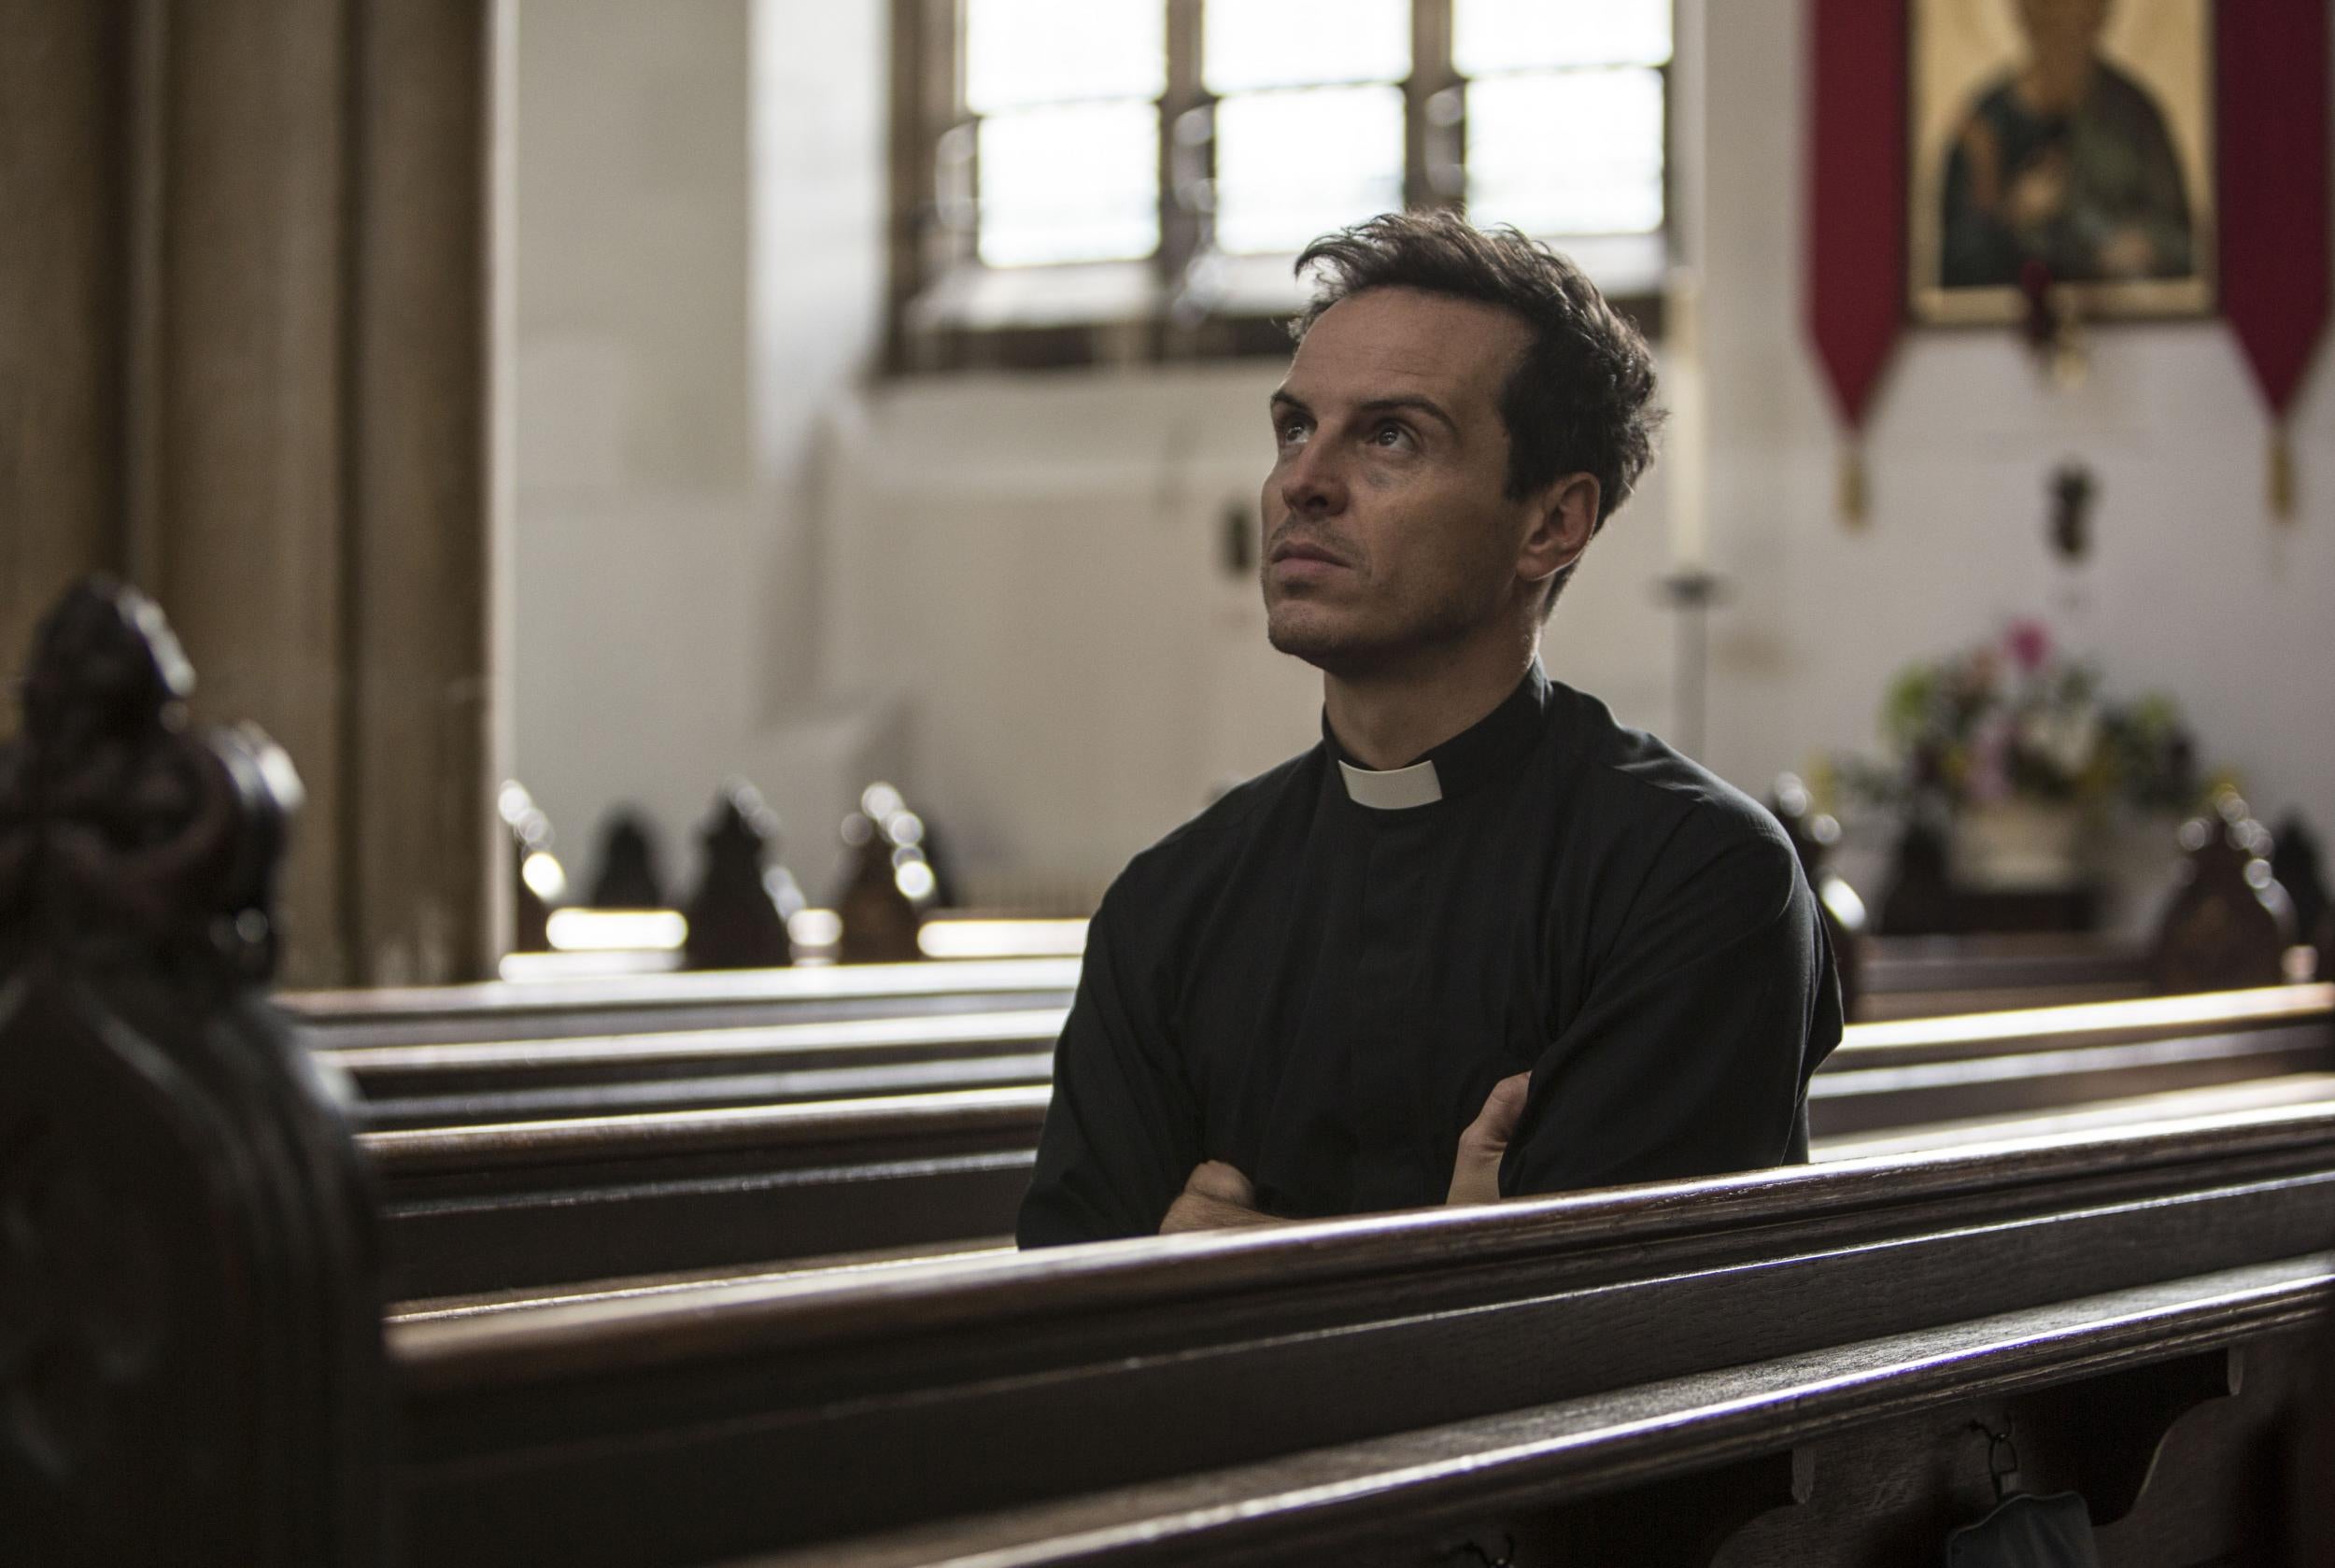 Andrew Scott’s turn as the ‘Fleabag’ character should surely inspire a few transformations